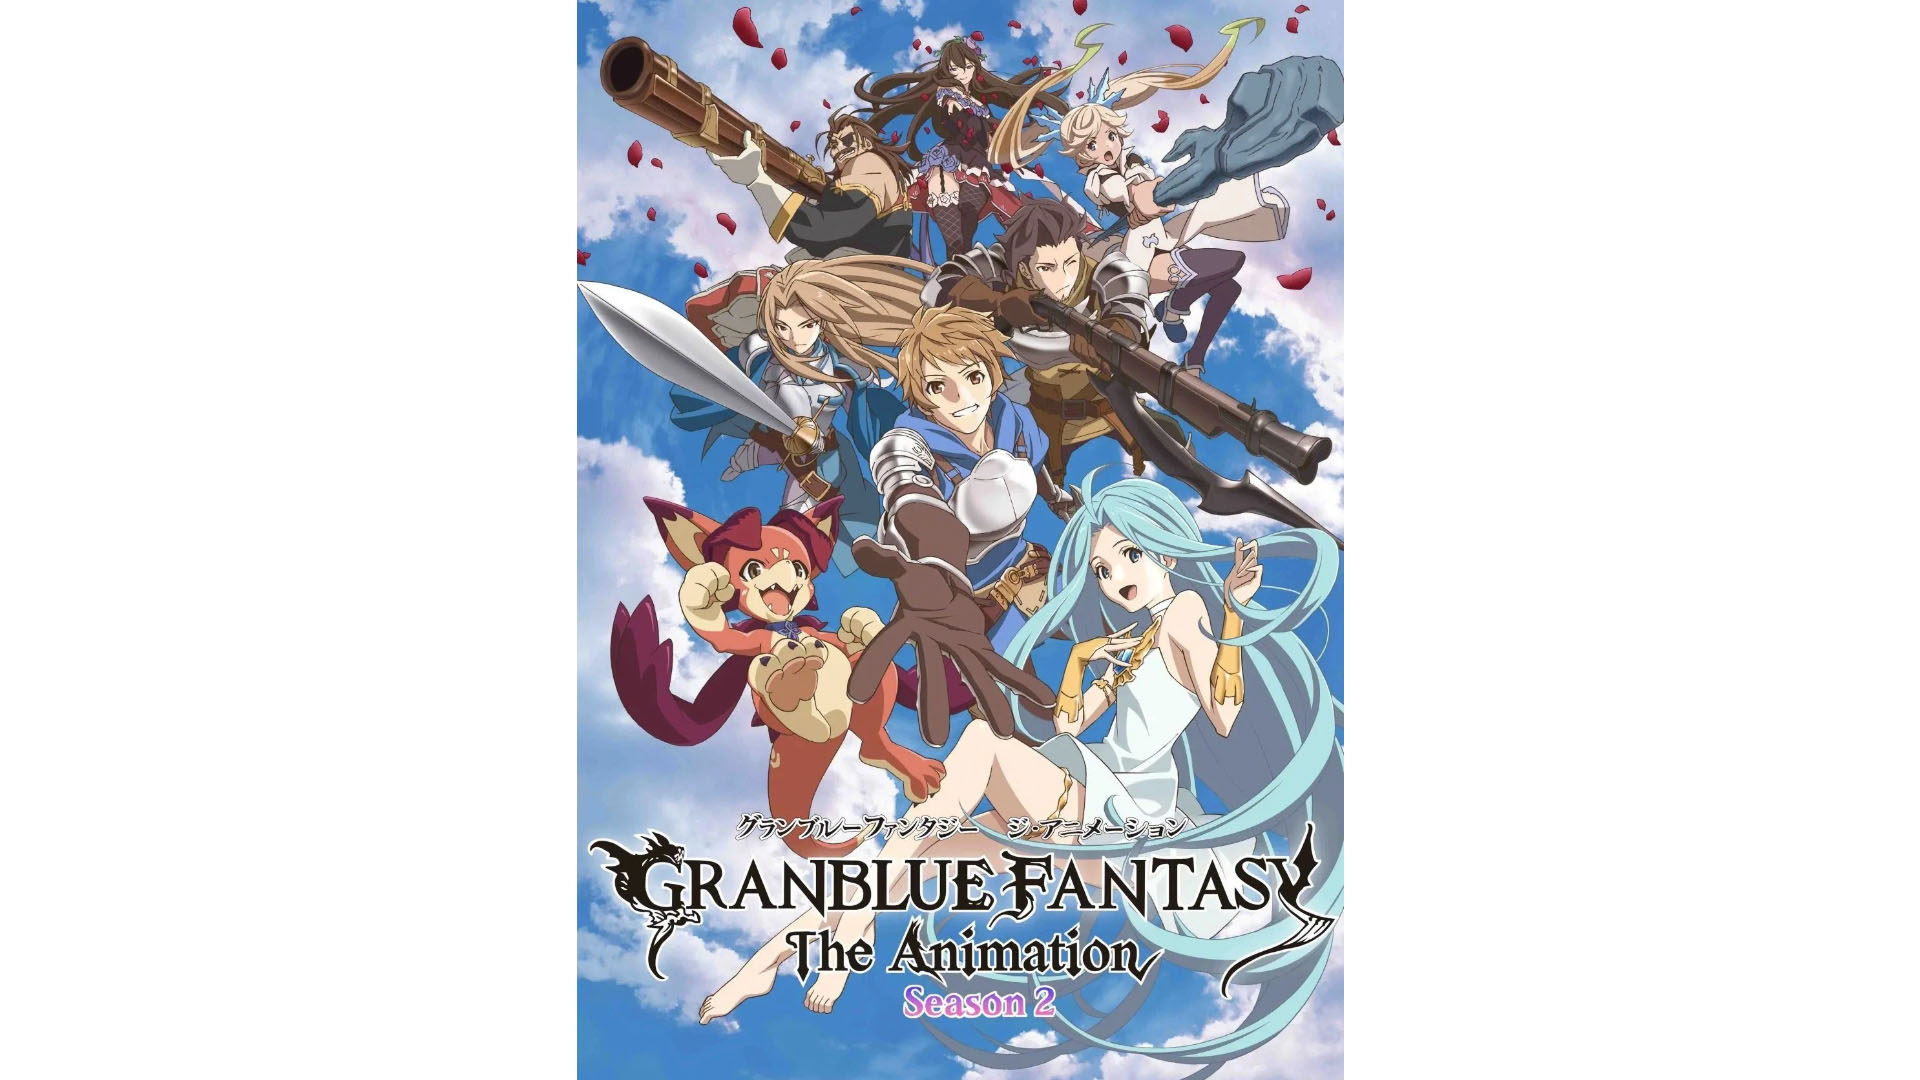 Granblue Fantasy: The Animation Season 2 Another Journey - Watch